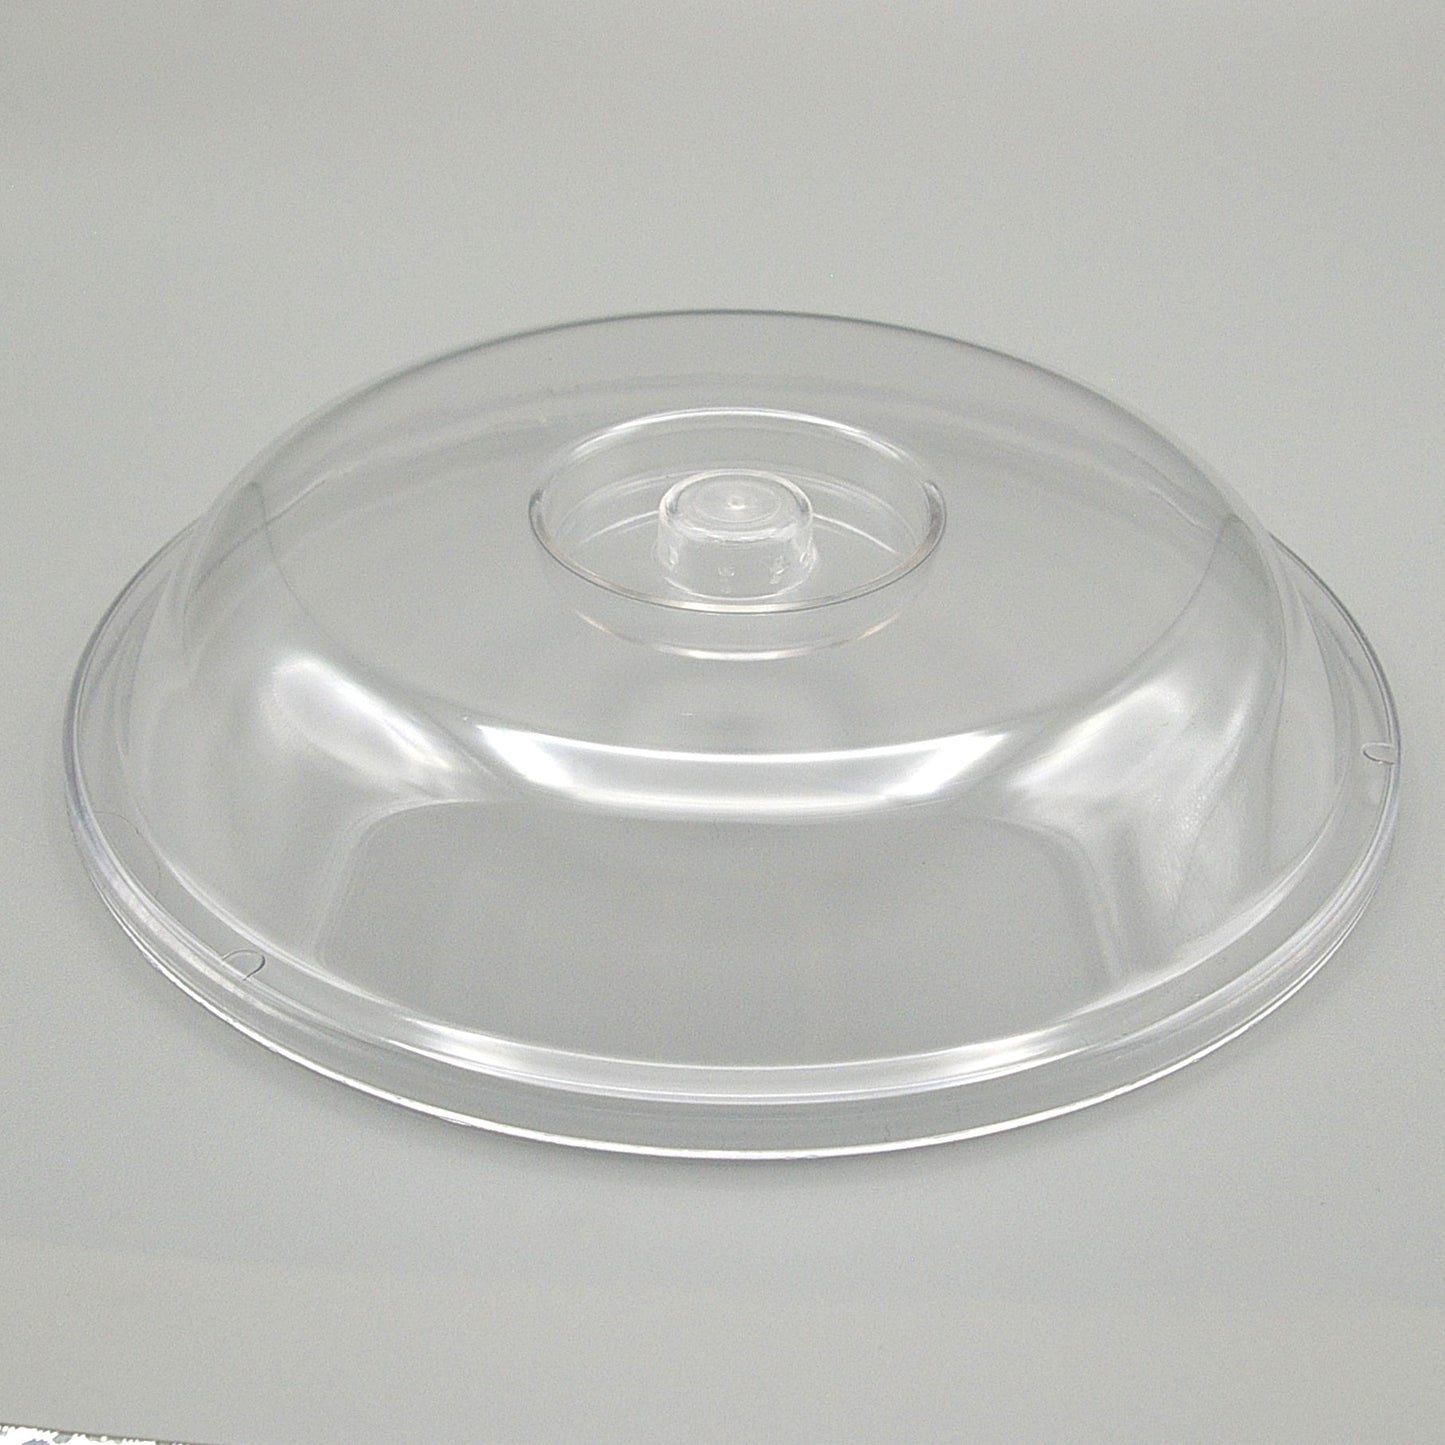 RDC-775-CL - High Temp Reusable Plastic 7.75"Round Clear Retherma Plate Dome Cover